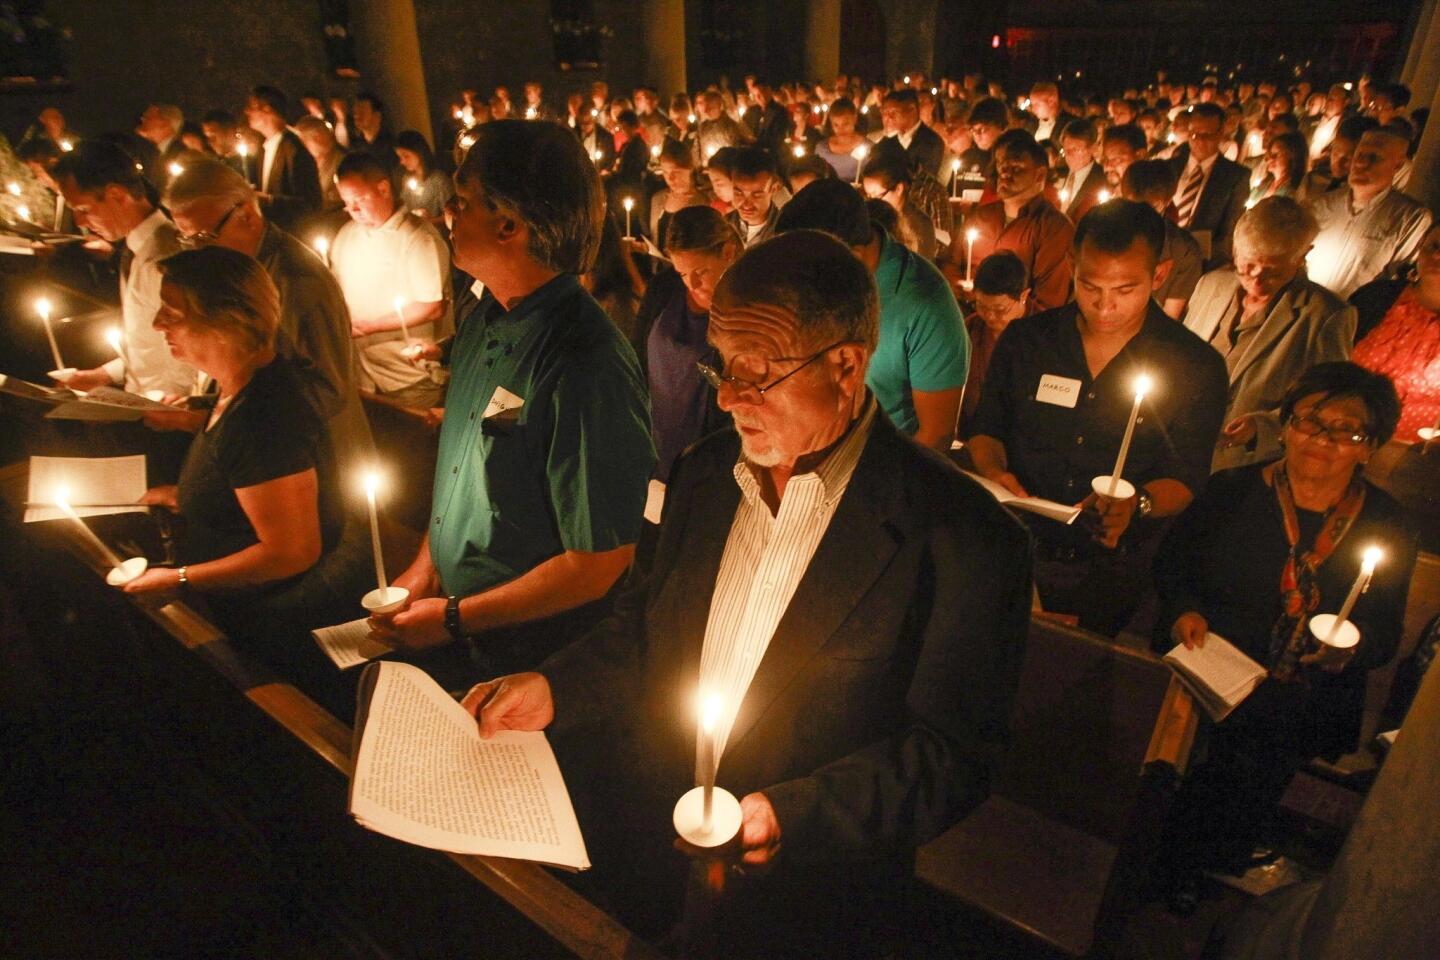 Parishioners hold lit candles during The Vigil of Easter at St. Paul's Cathedral.